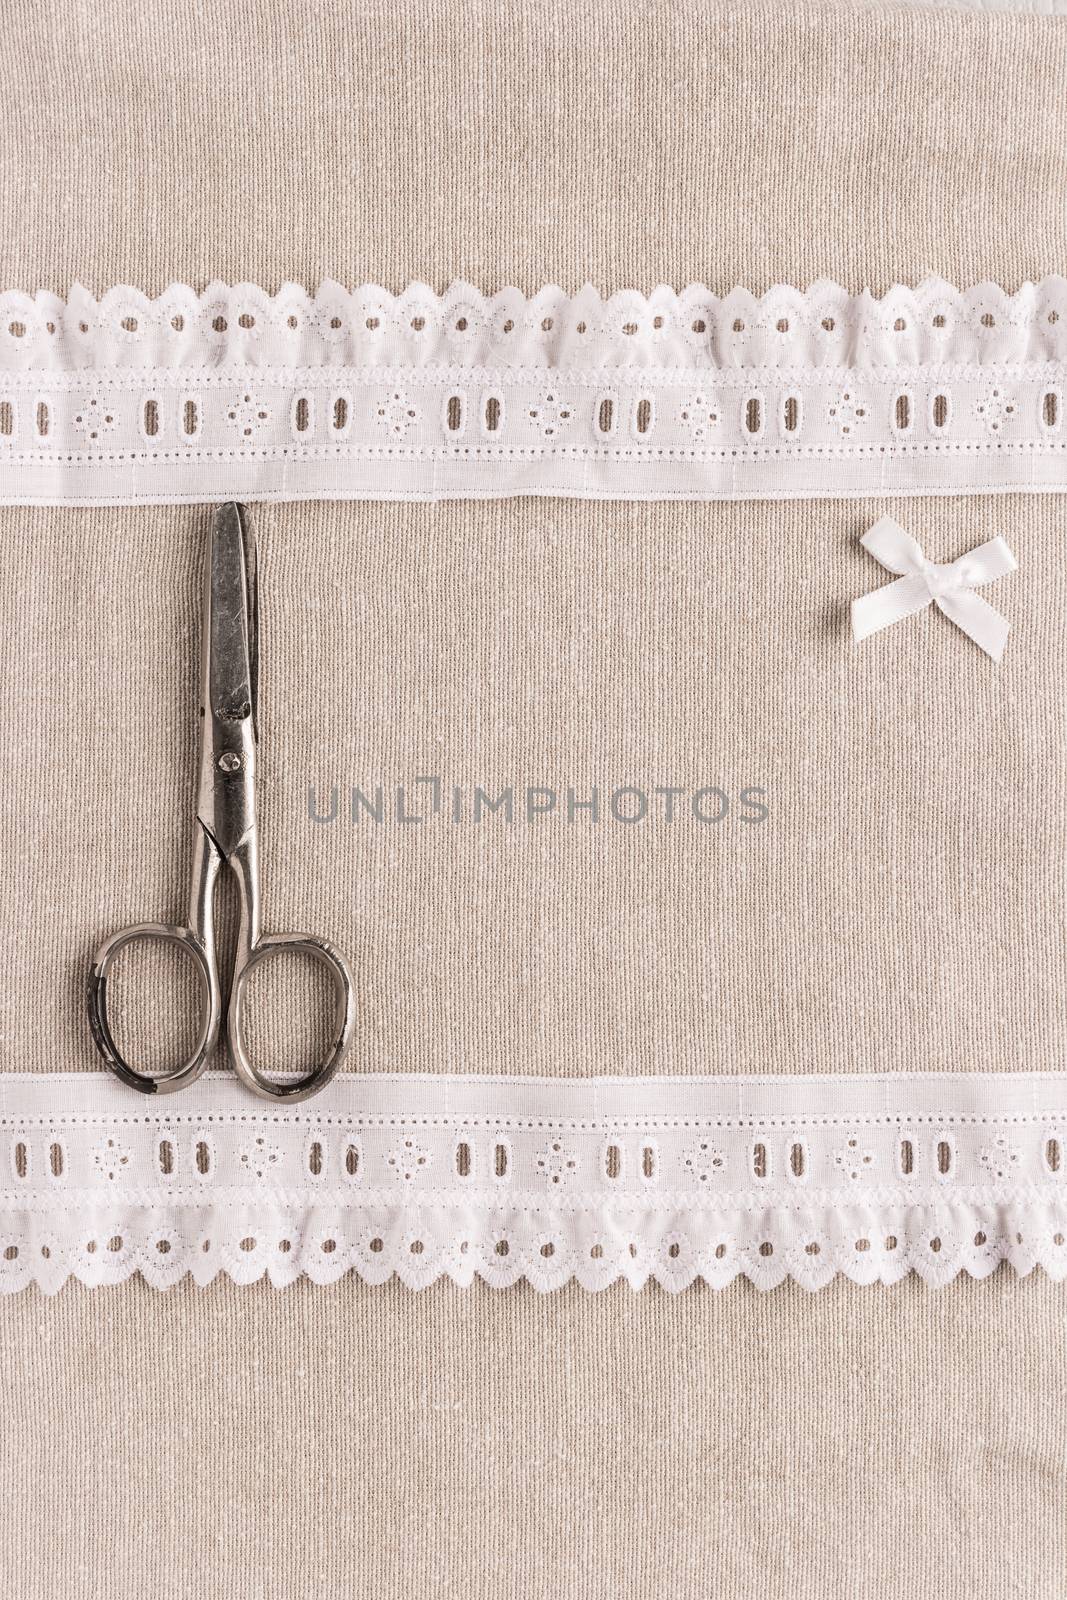 Rustic fabric for sewing, lace, scissors and accessories for needlework on old wooden background. Top view with copy space.